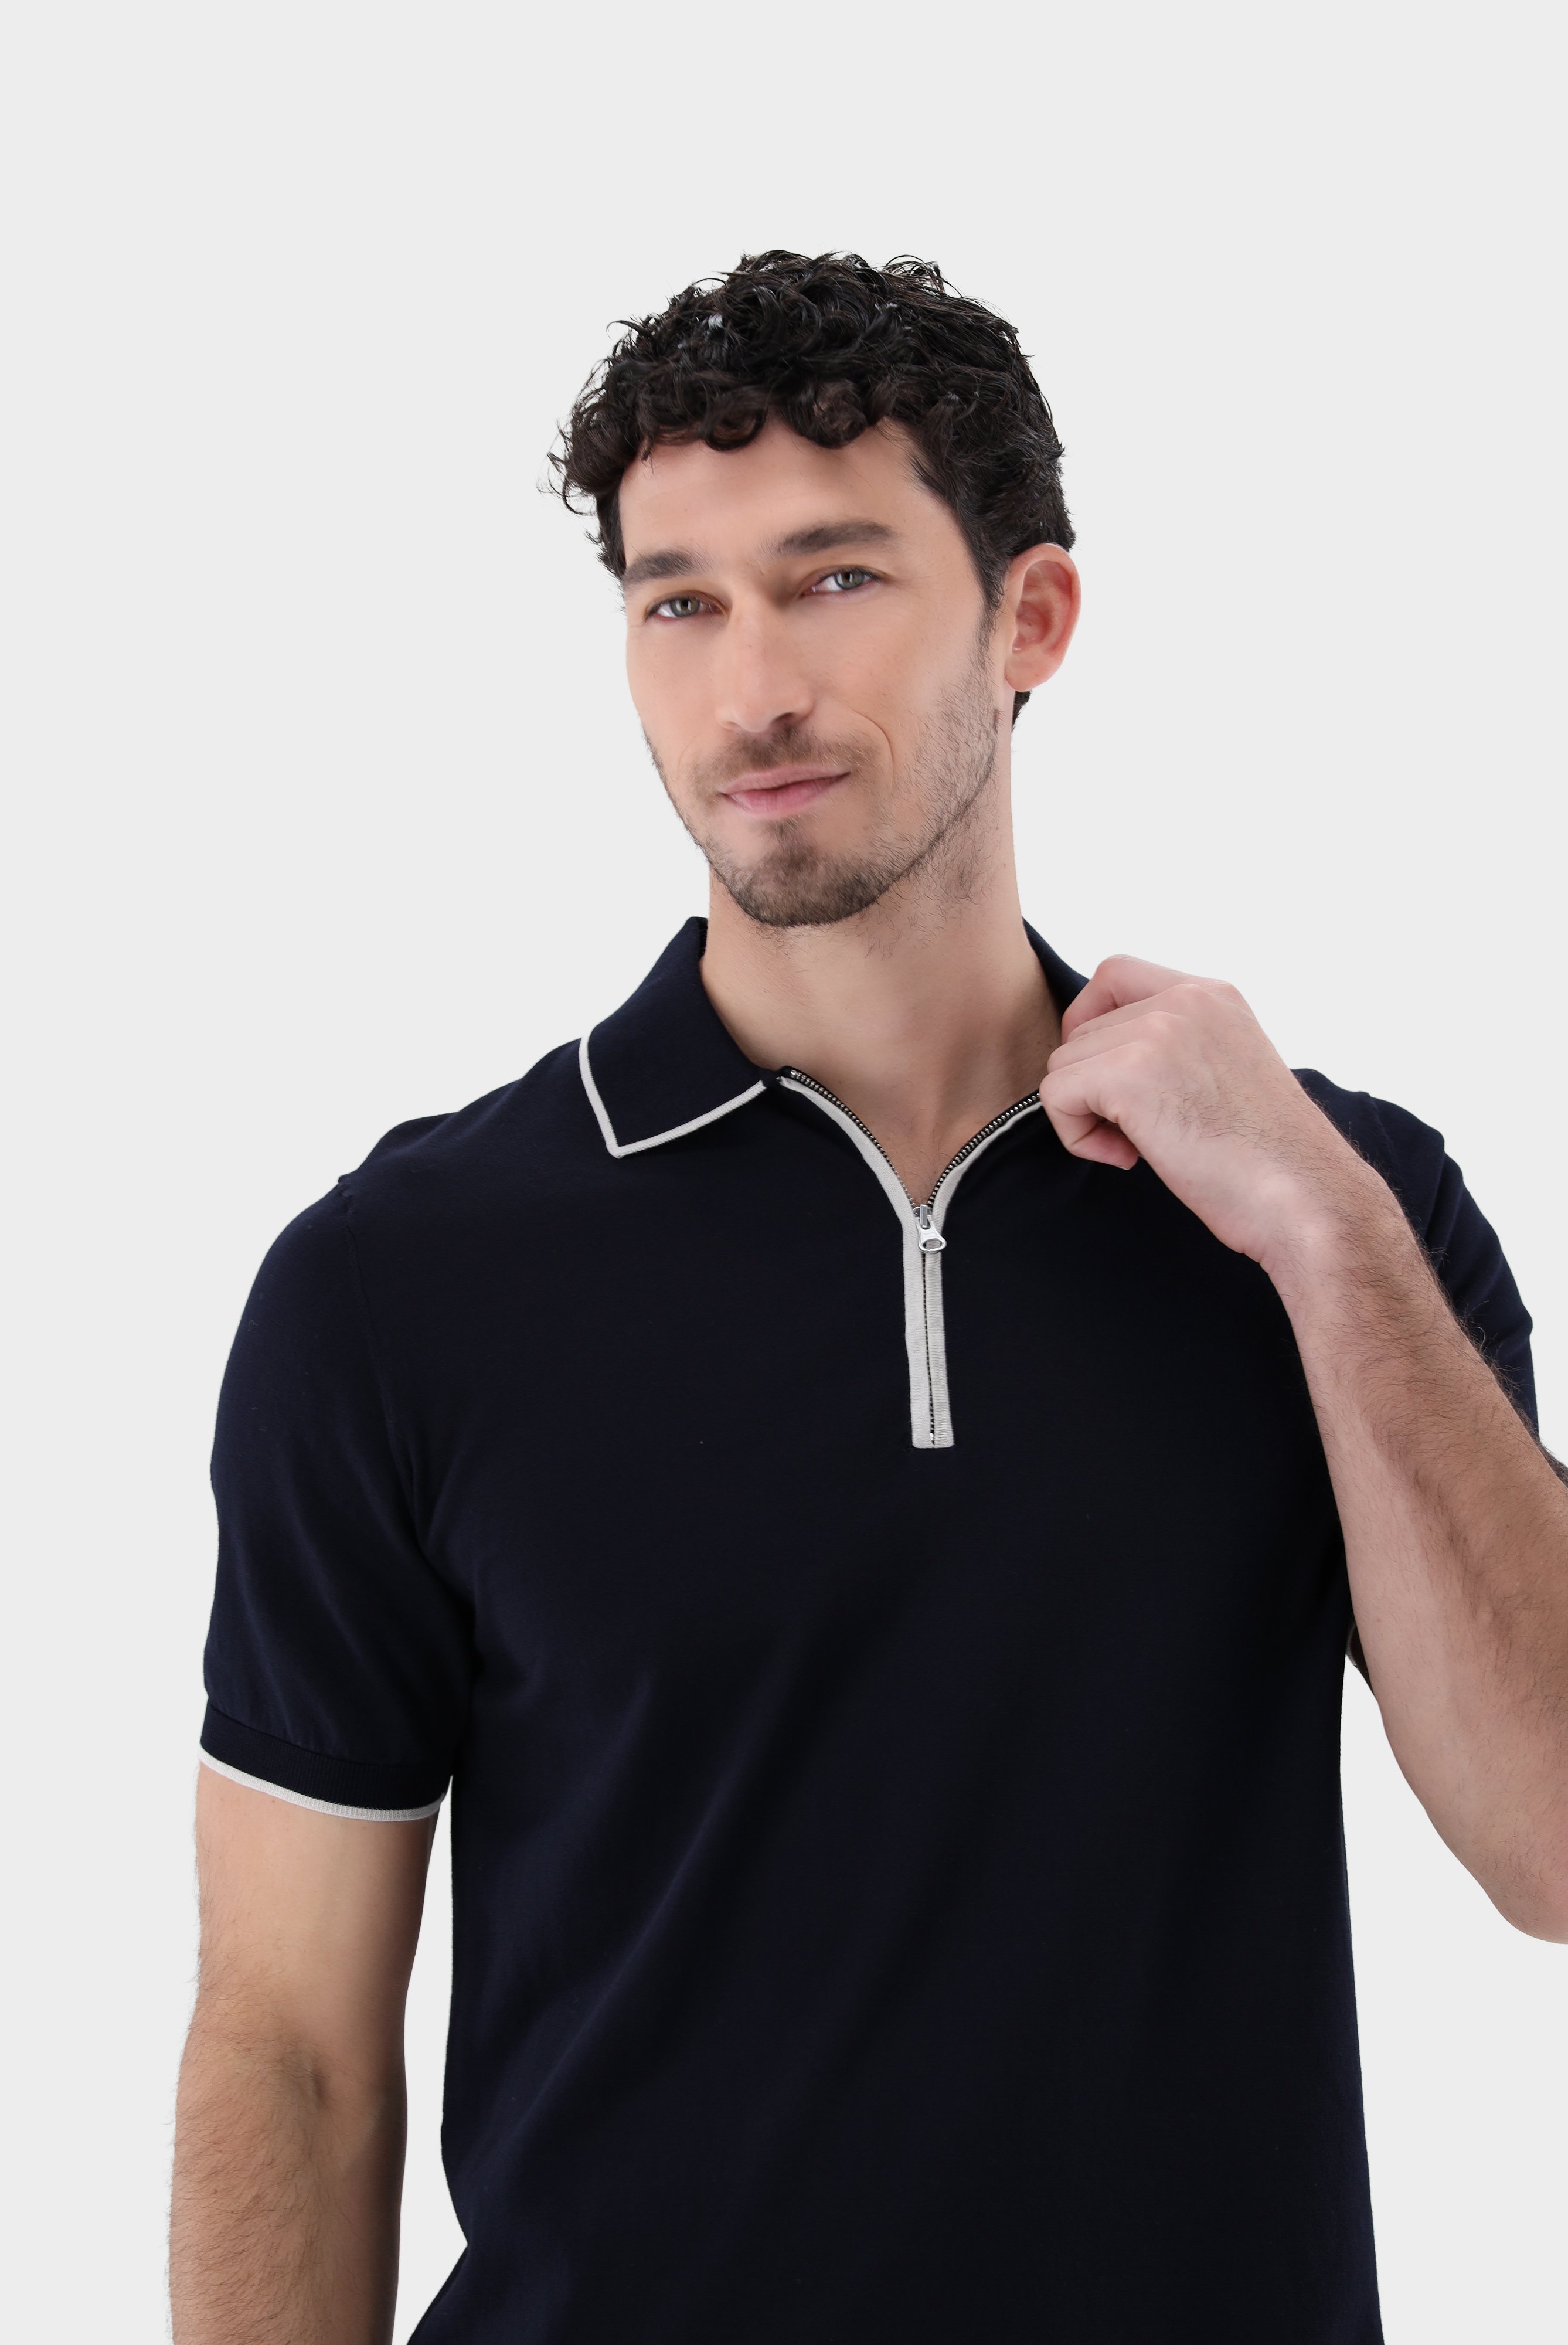 Poloshirts+Zip Knit-Polo in Air Cotton+82.8647.S7.S00174.795.M